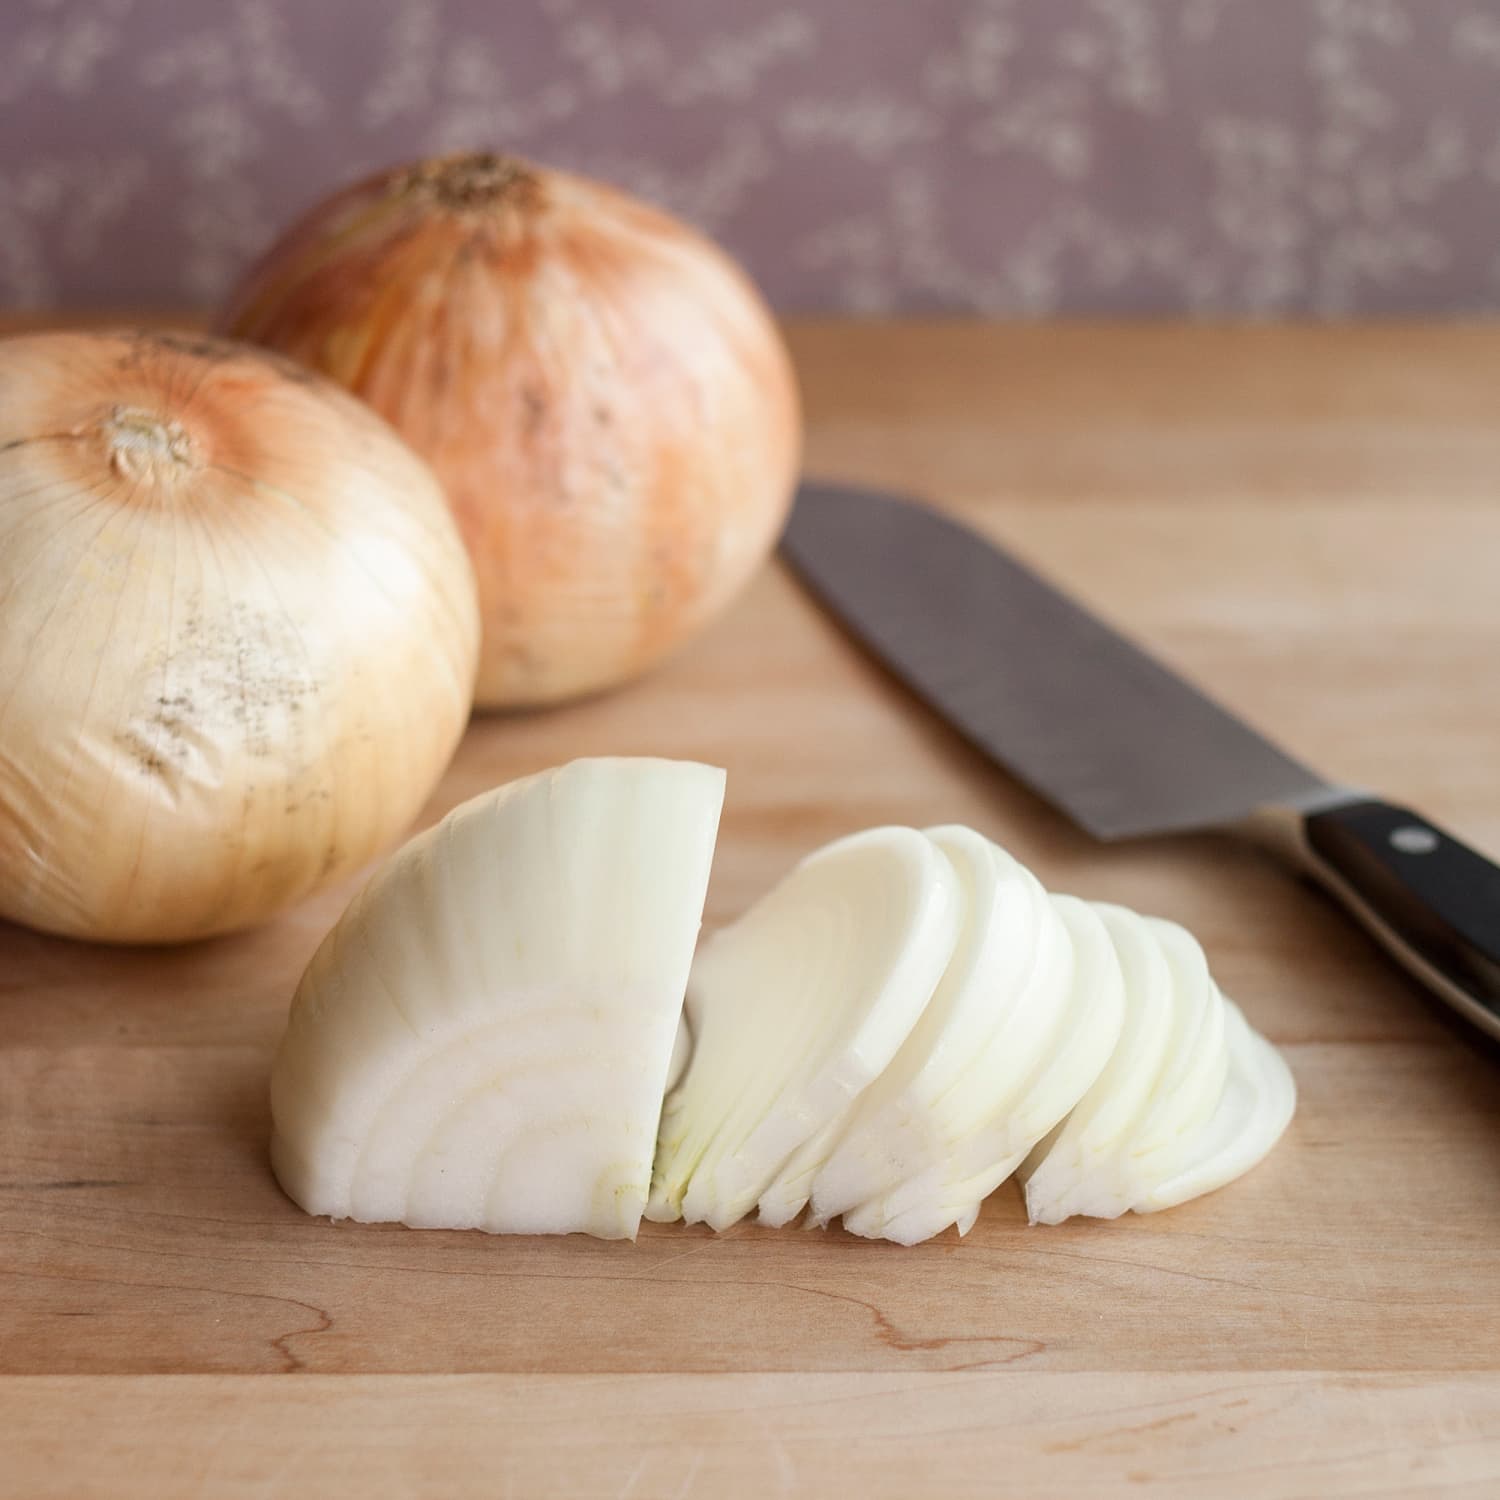 Best Substitutes For Onions - The Kitchen Community